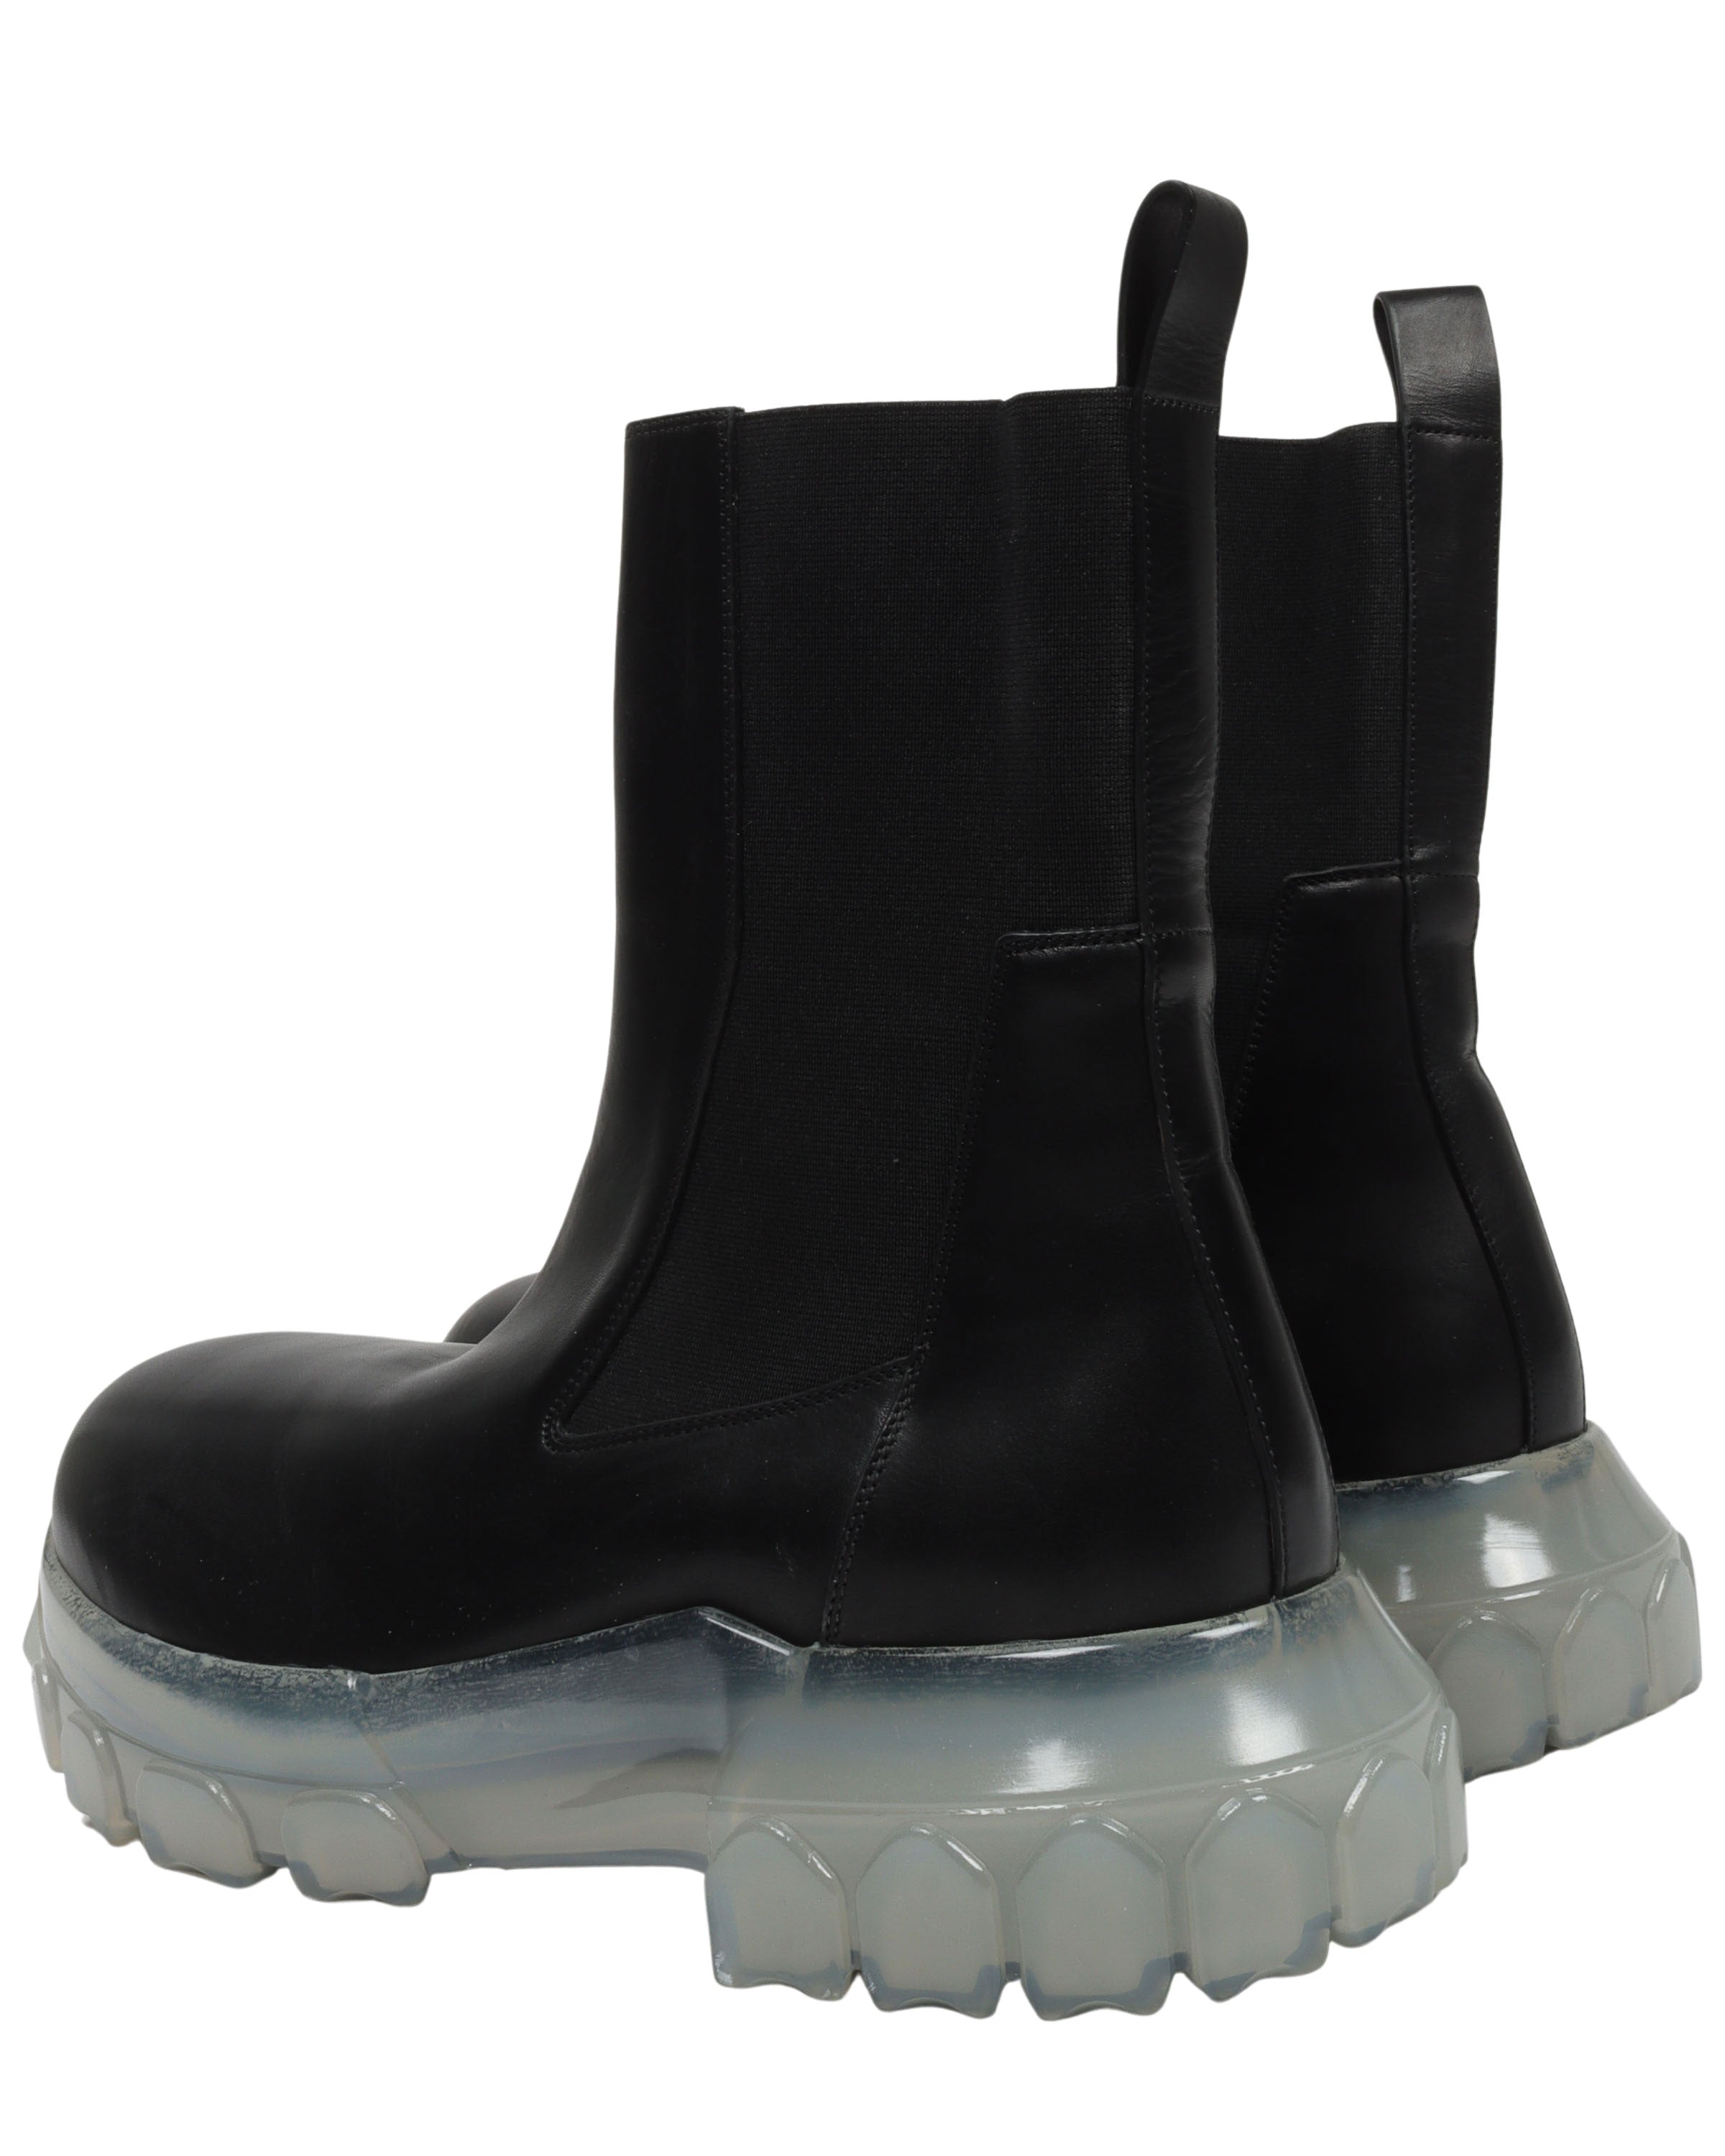 Clear Sole Bozo Boots